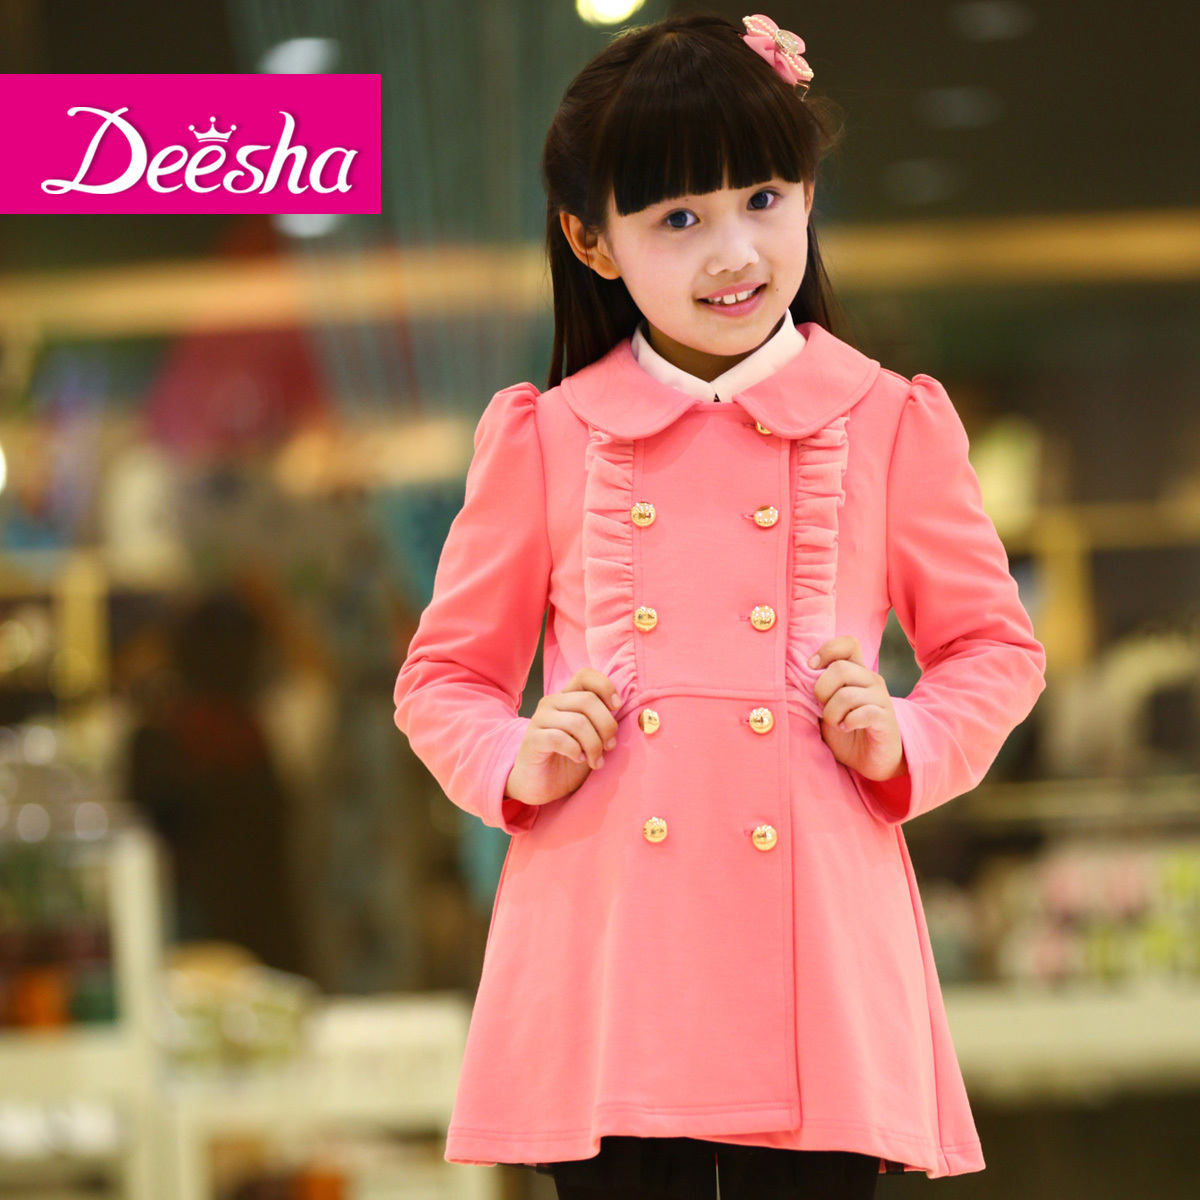 DEESHA 2012 spring and autumn female clothing princess medium-long trench outerwear 1217004 free shipping